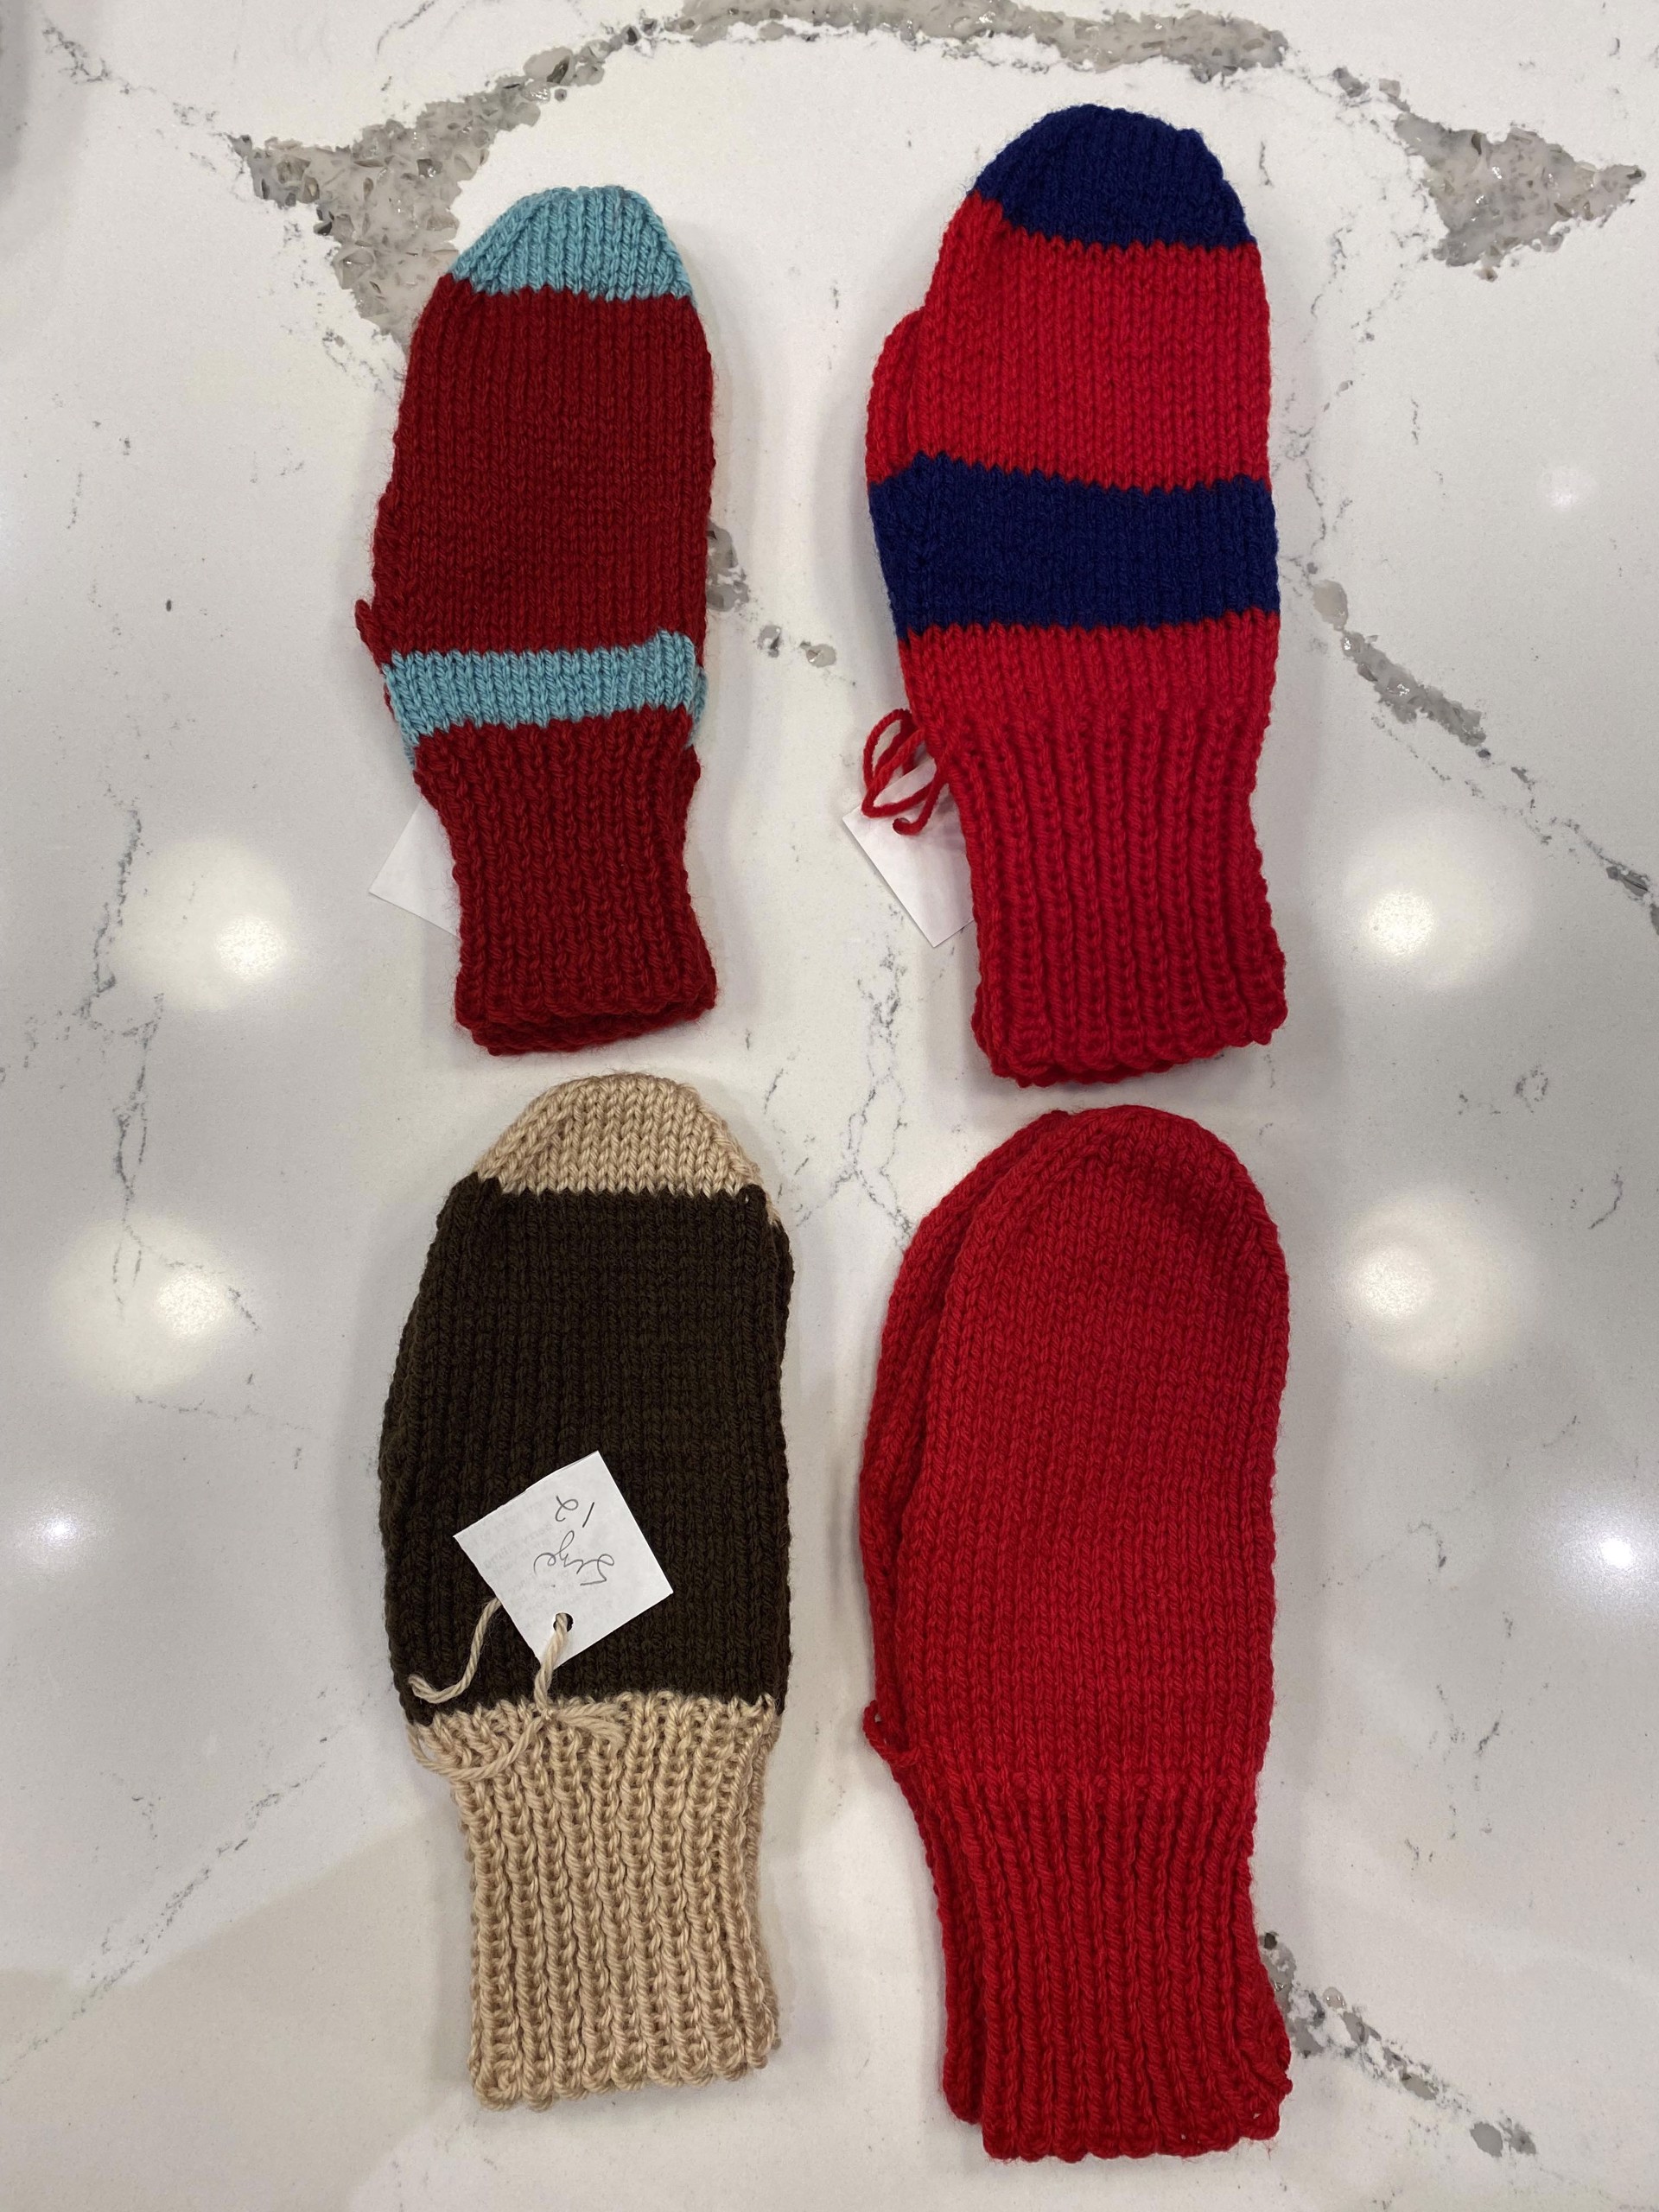 Handmade Mittens - Size 12 by Cathy Miller